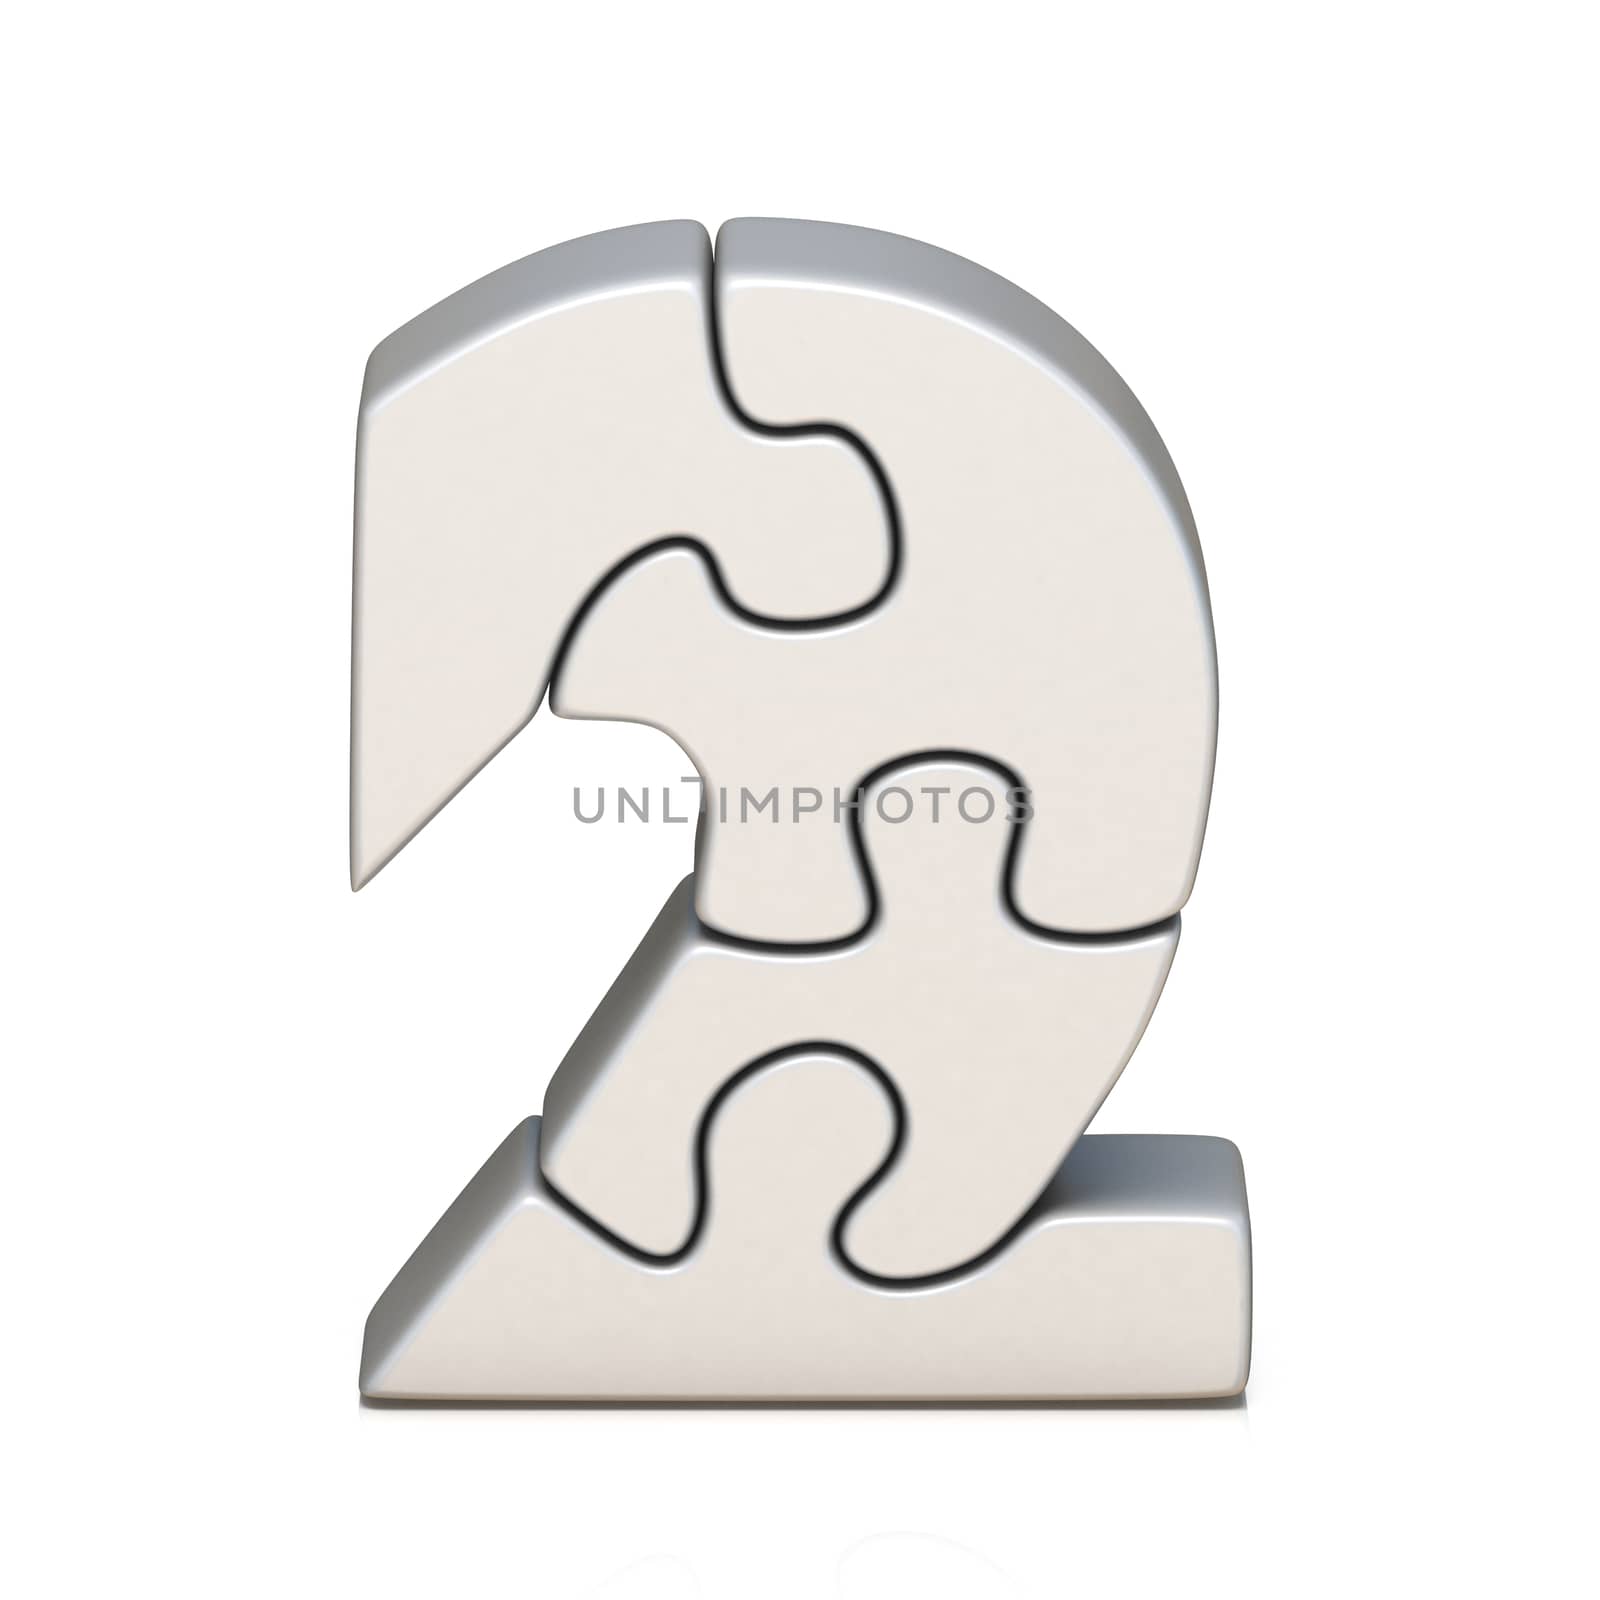 White puzzle jigsaw number TWO 2 3D render illustration isolated on white background